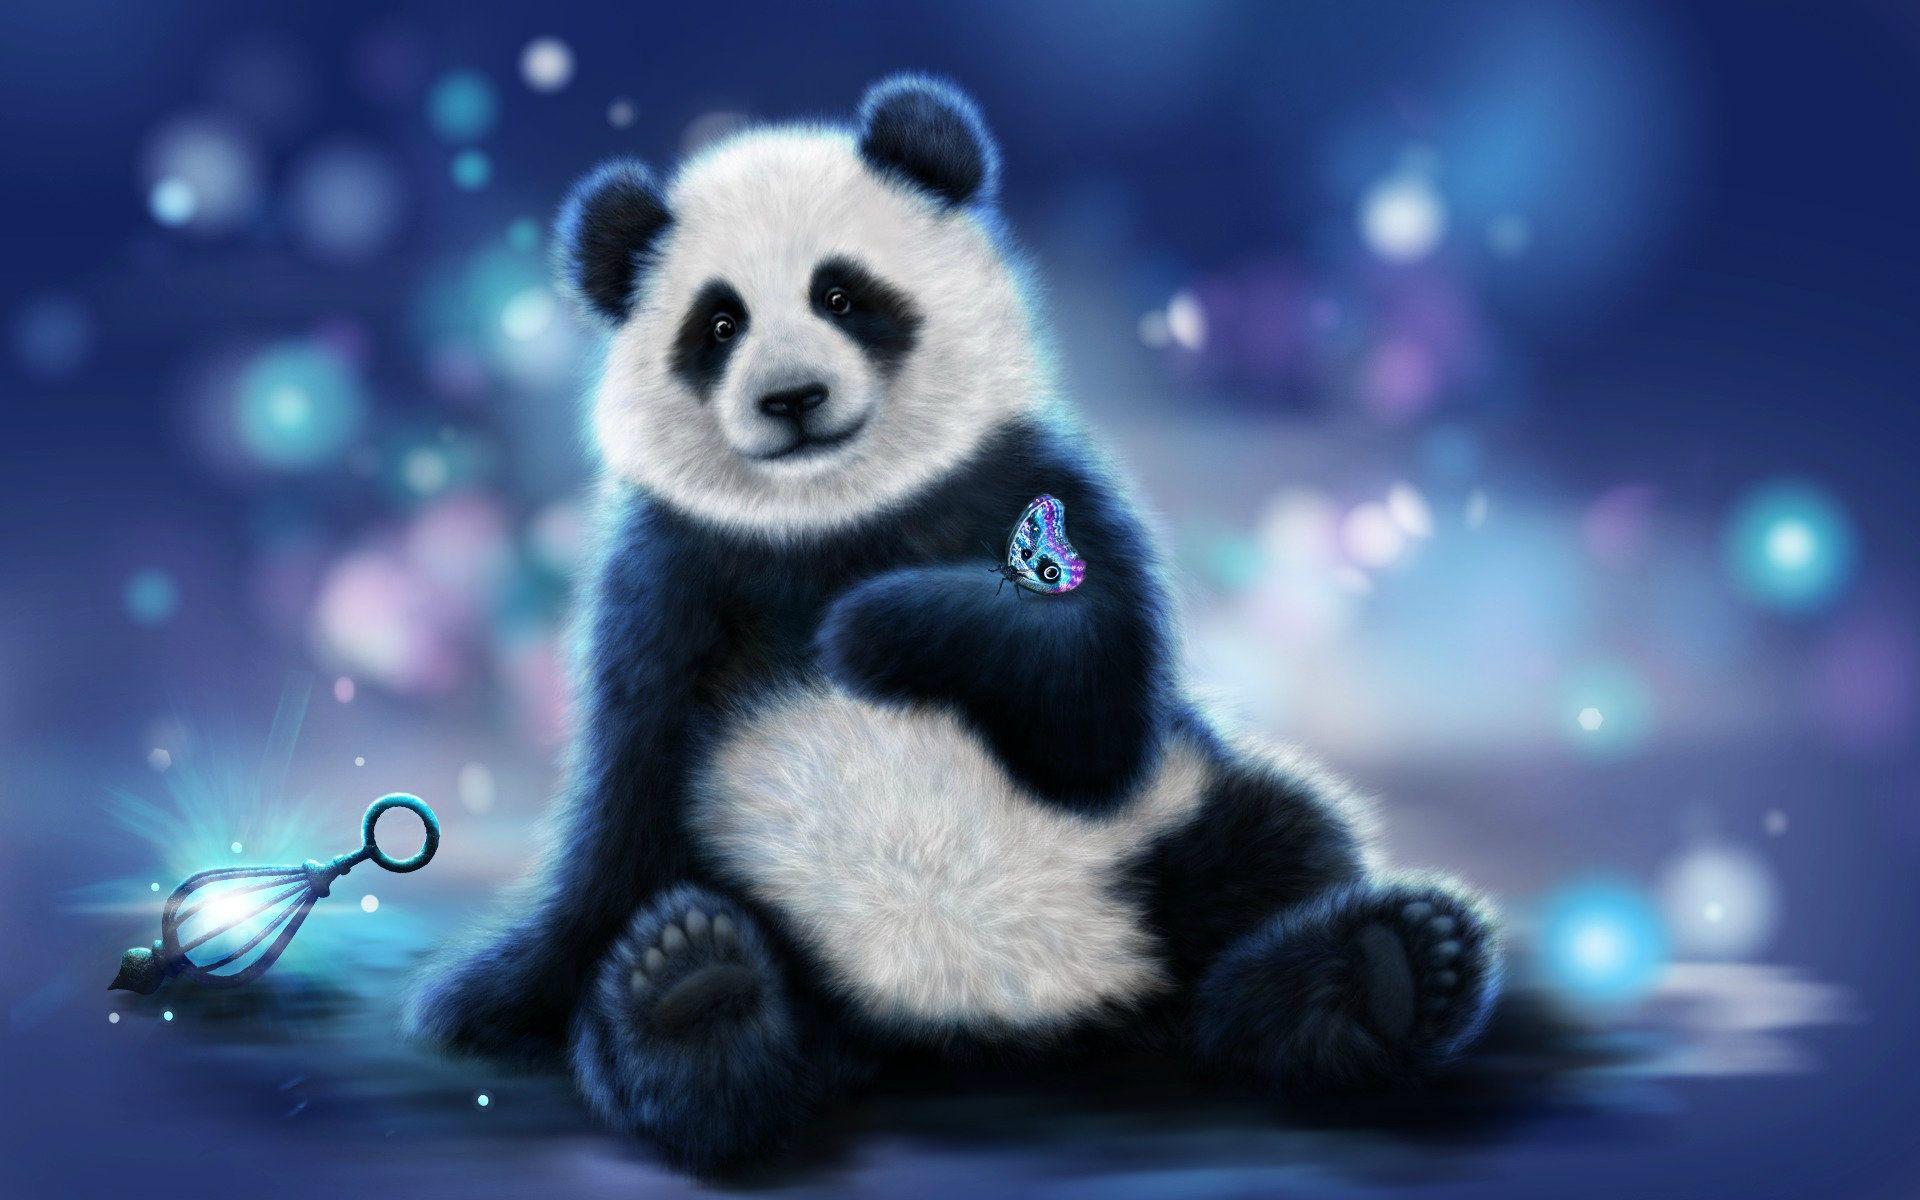 3D & abstract Panda image Wallpaper. Beautiful image HD Picture